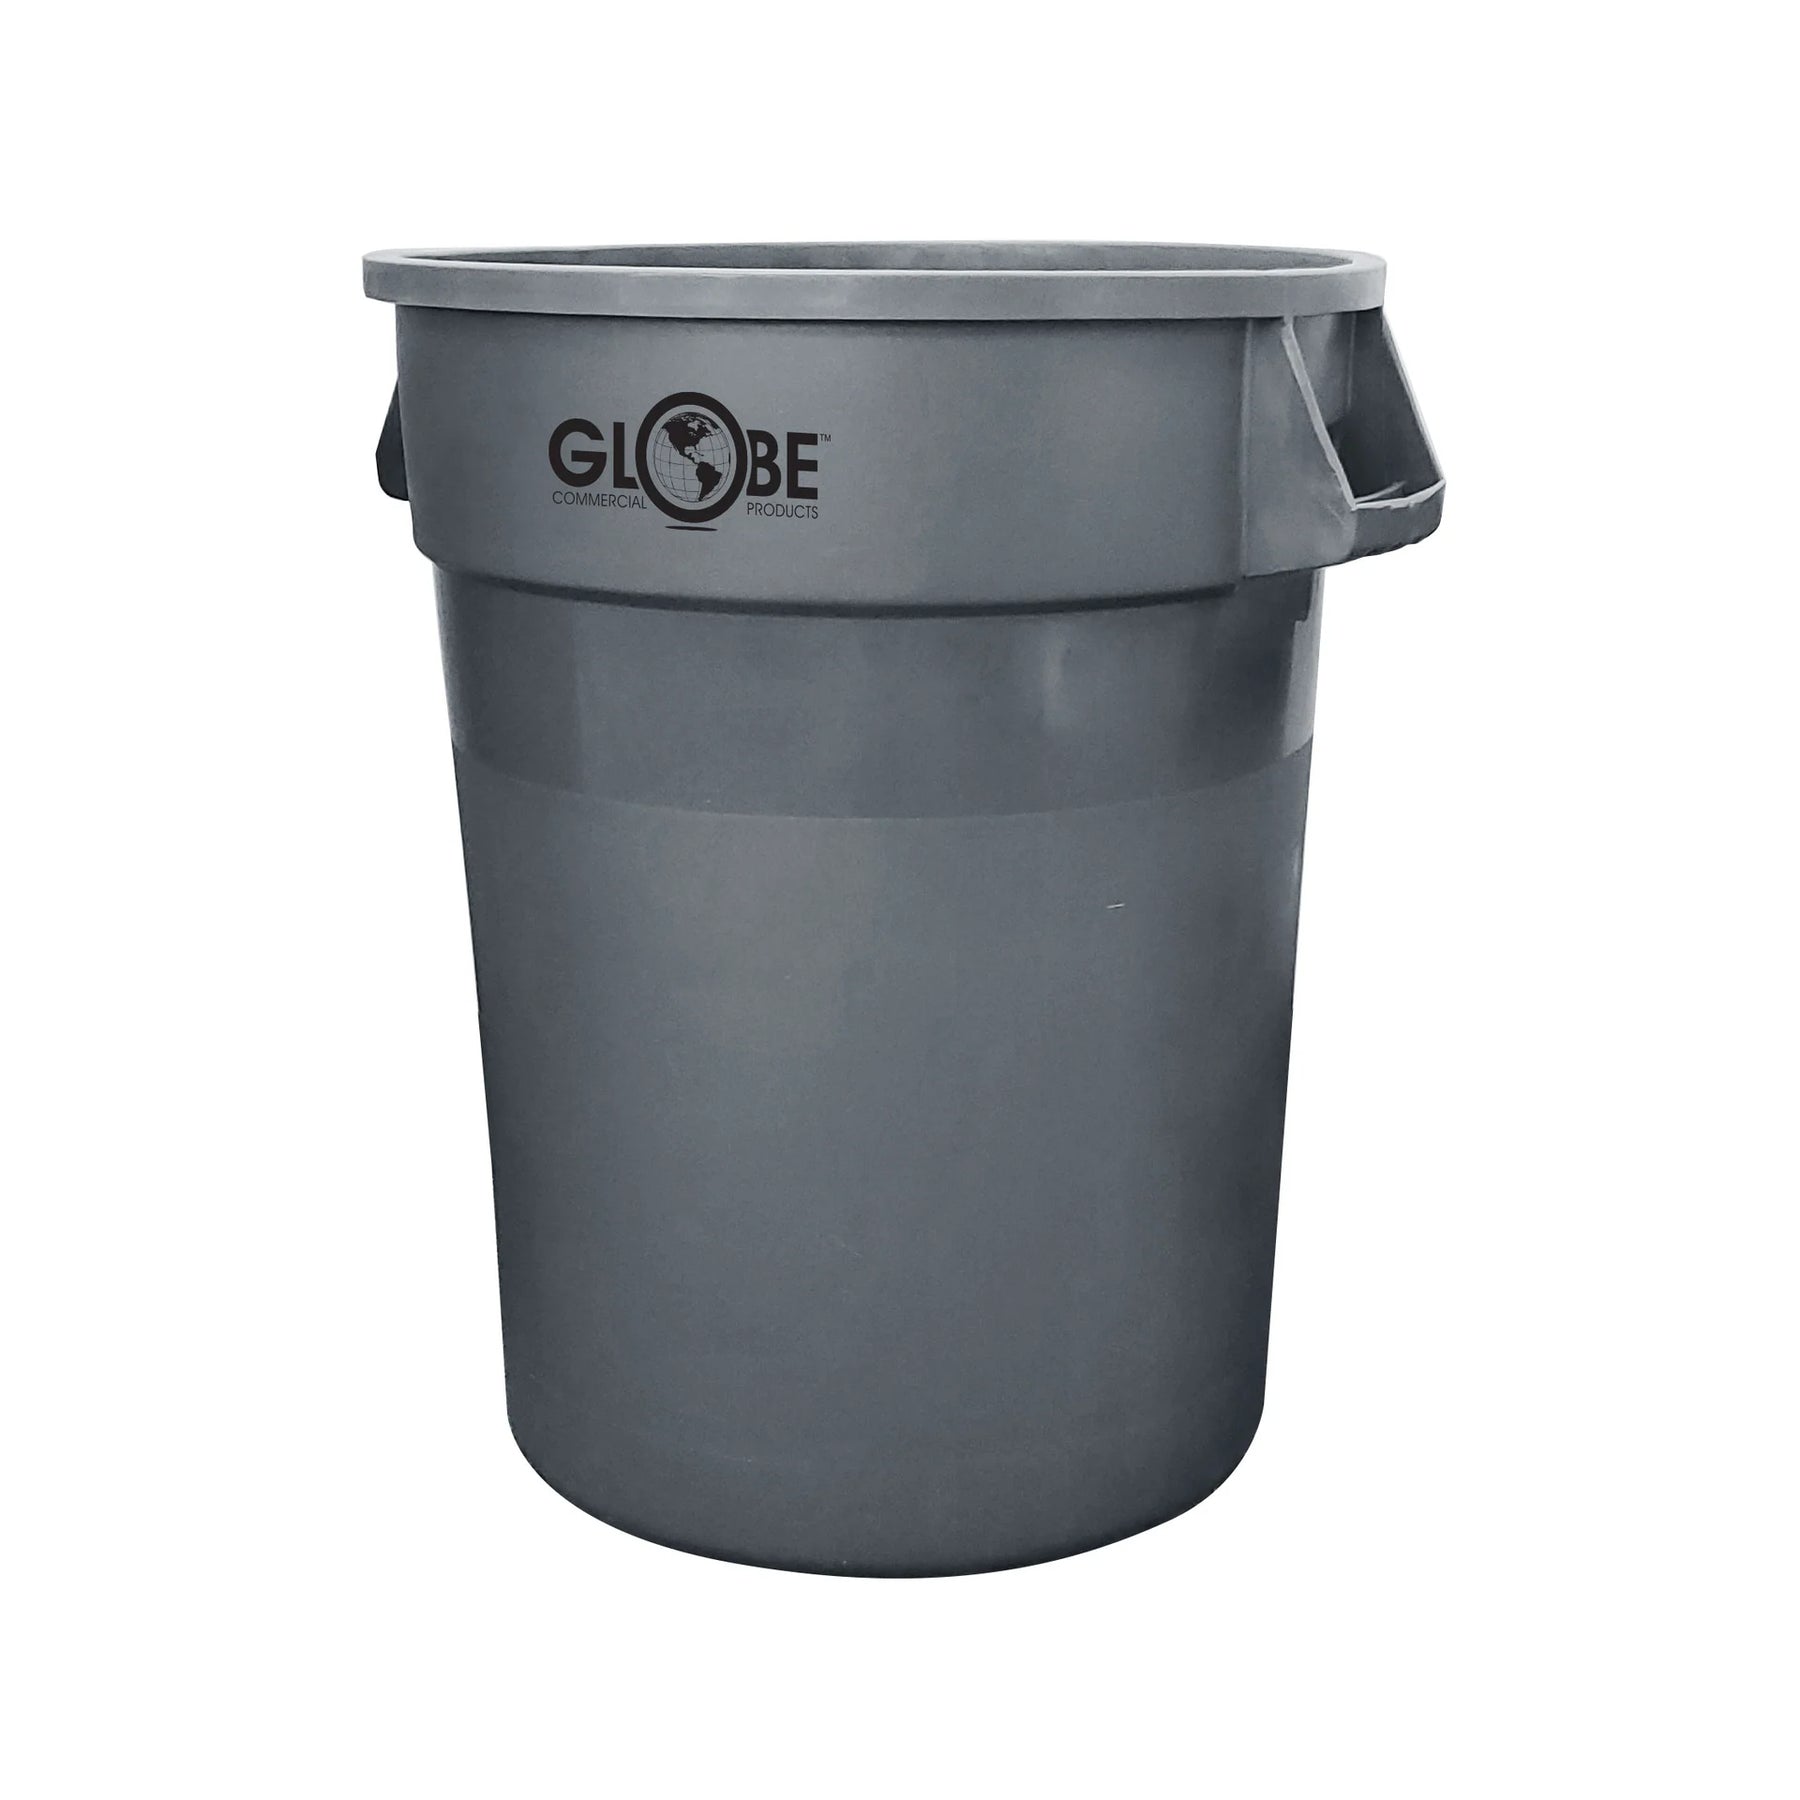 Globe Commercial Grey Waste Containers - 20 Gallon / Grey 9640